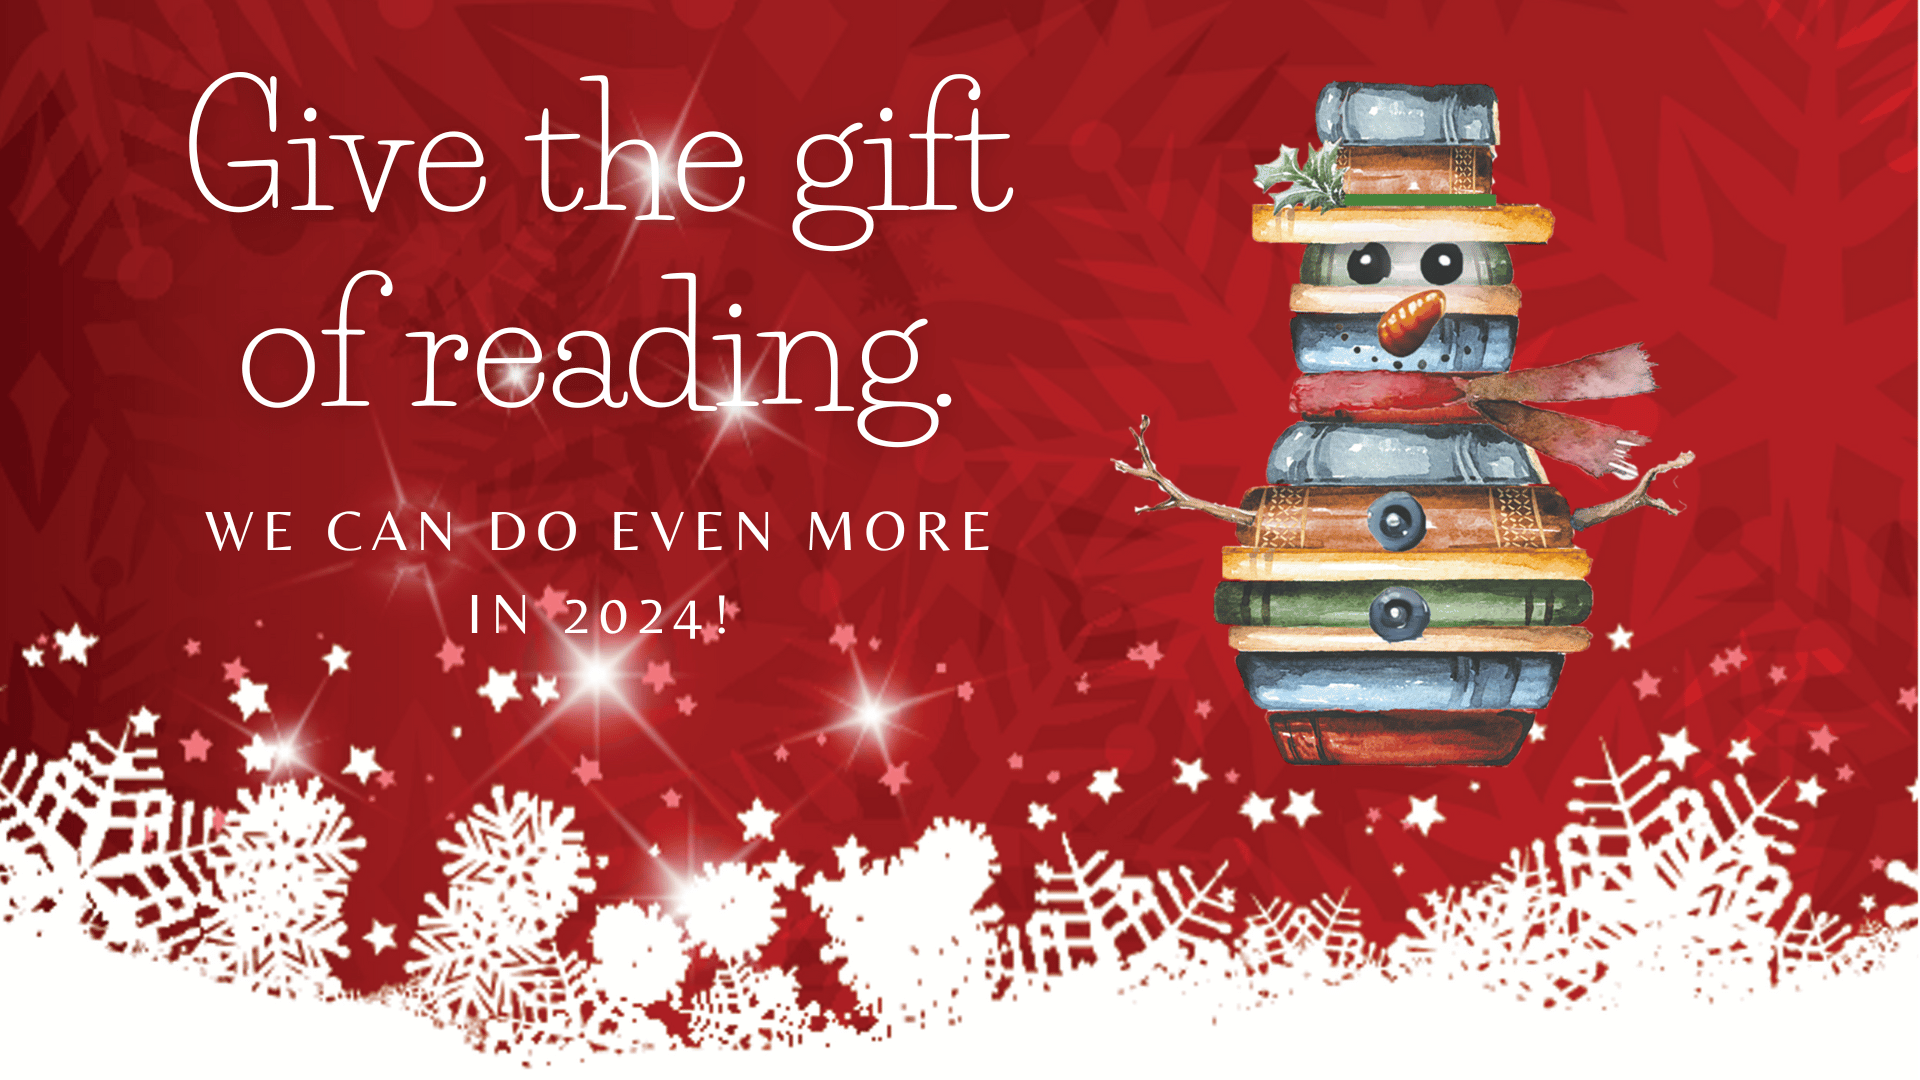 Give the gift of reading